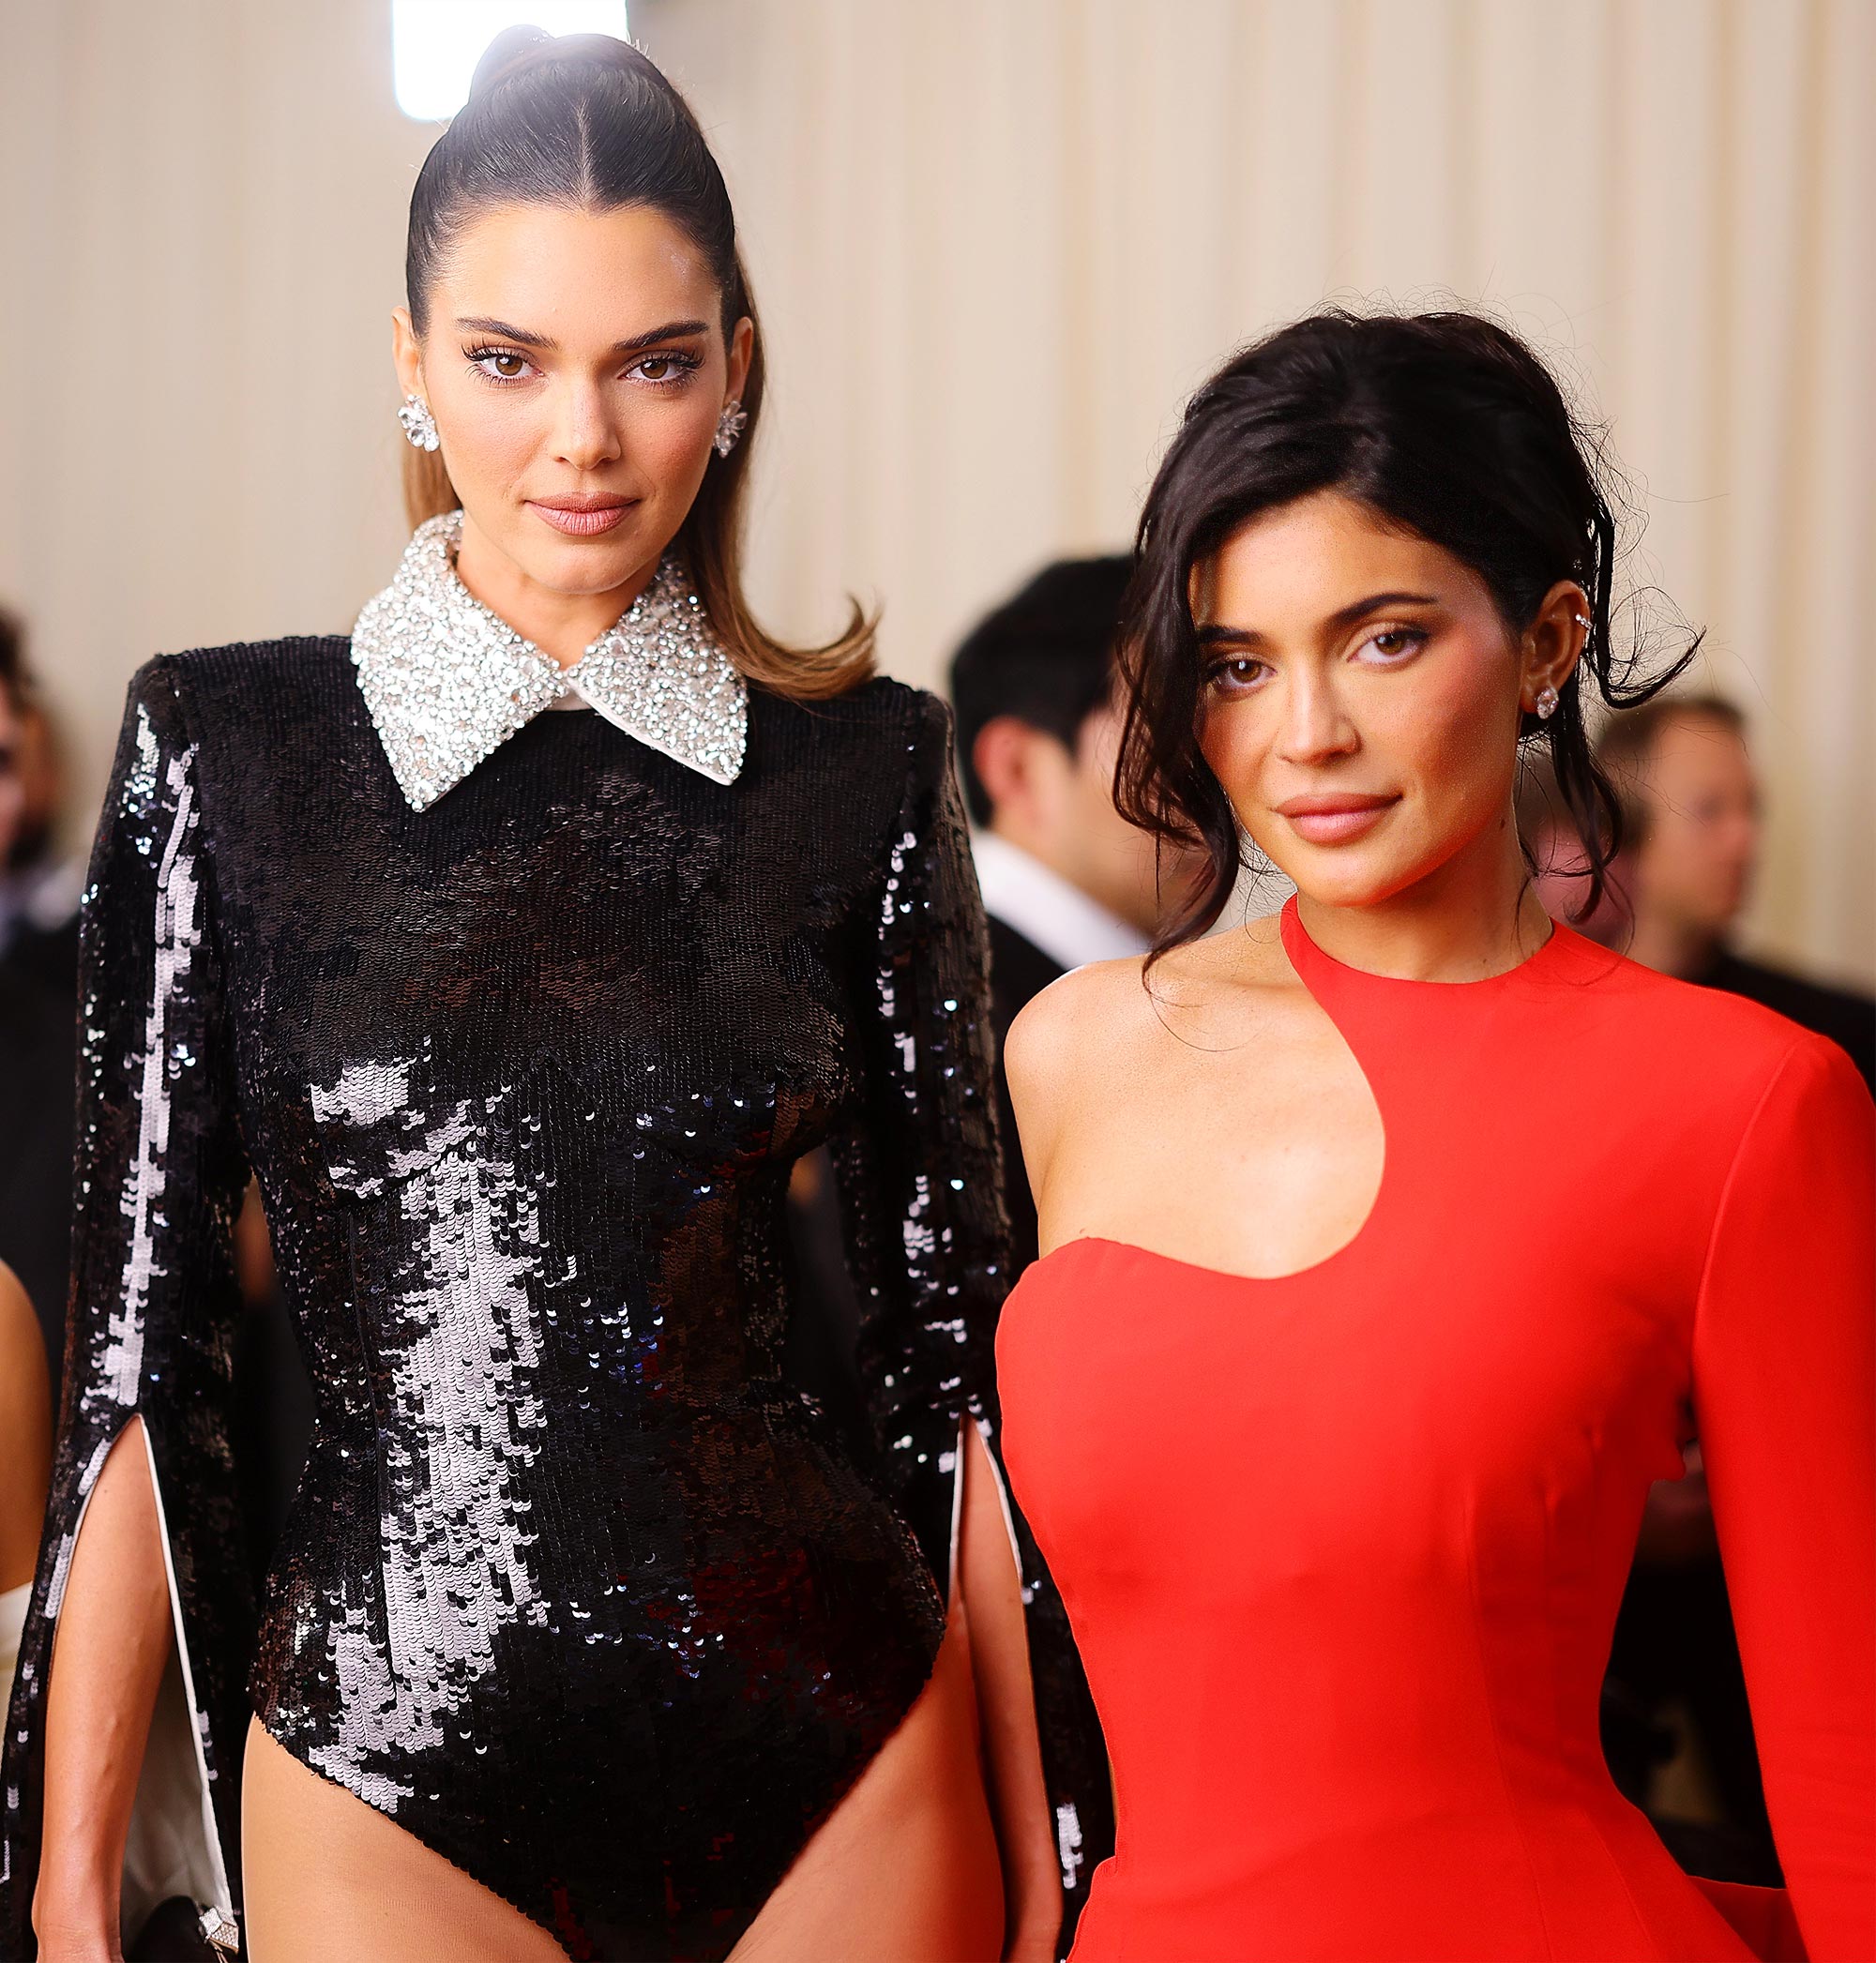 See Kendall and Kylie Jenner Compare Their Styles — With Accessories